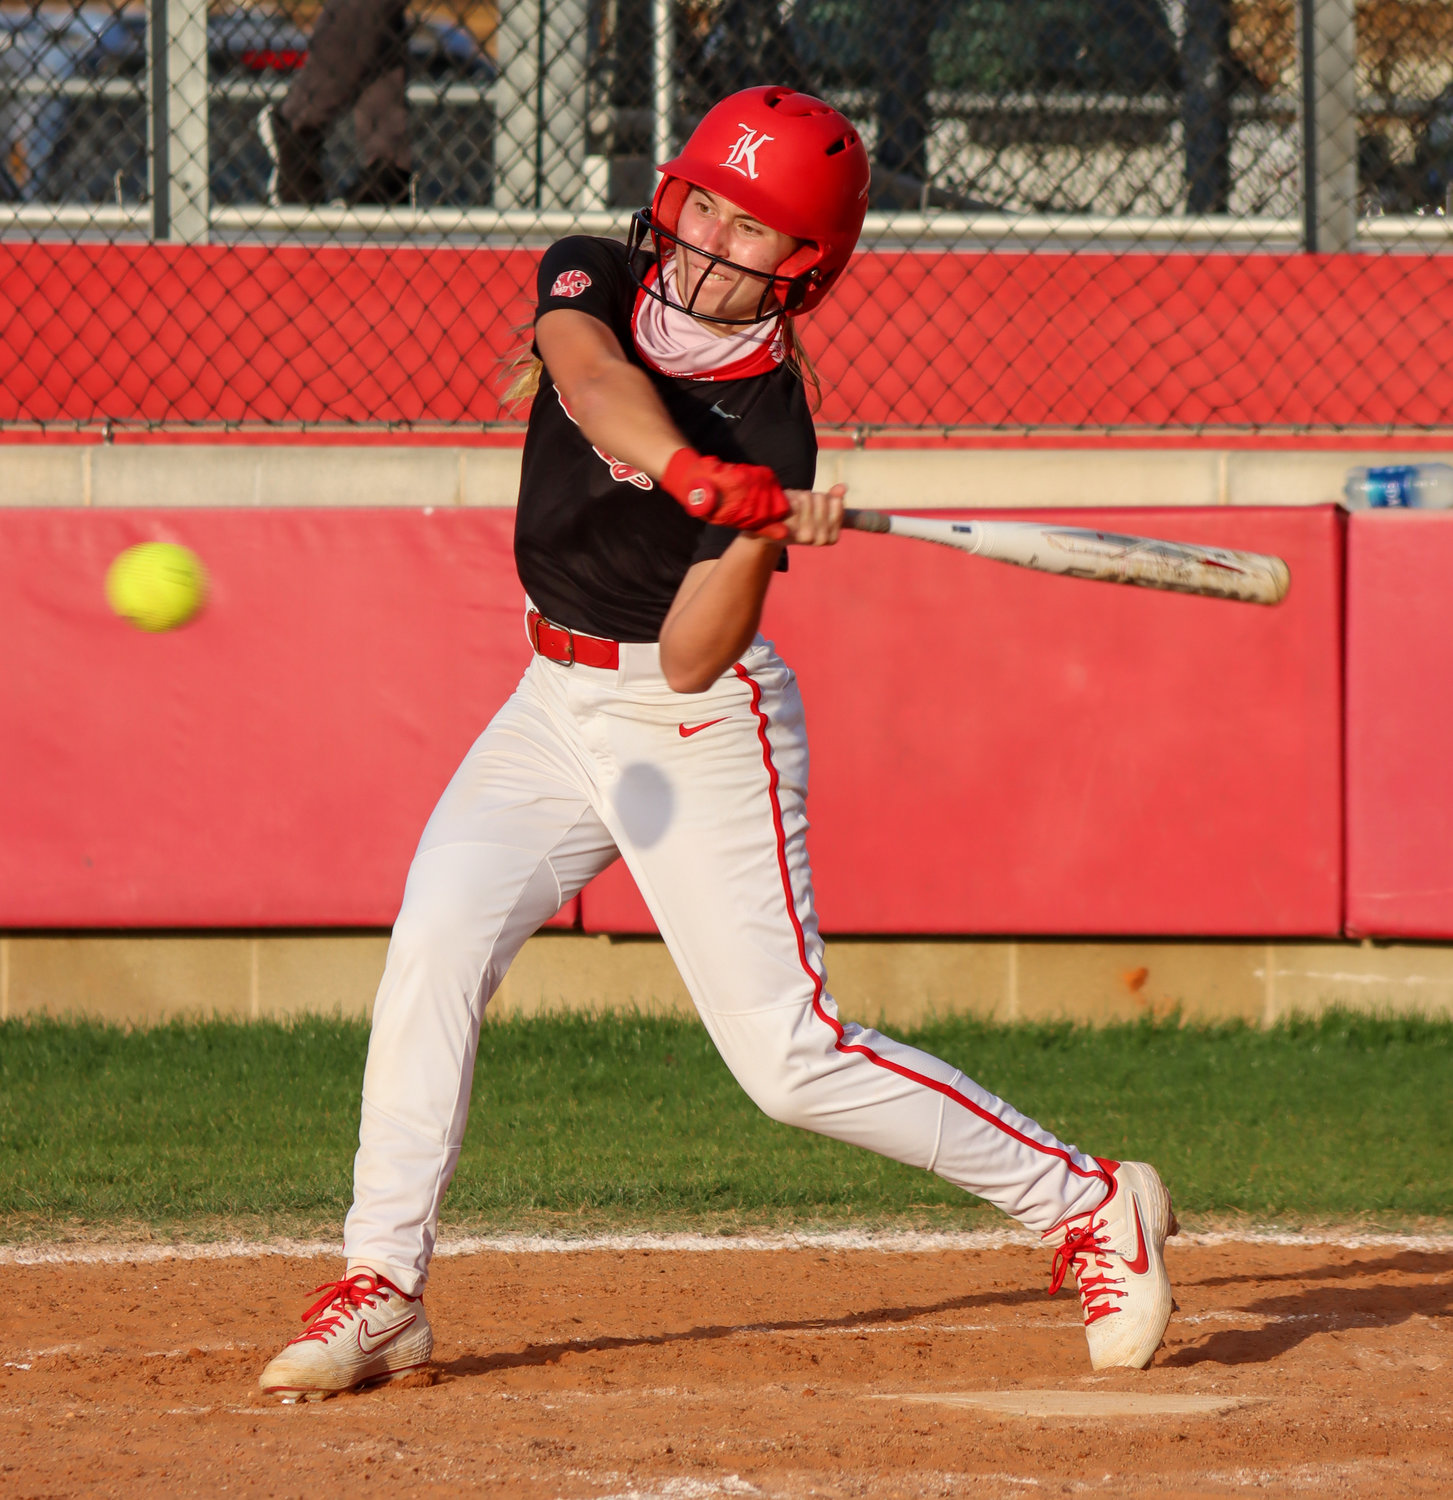 Katy High freshman Ashtyn Reichardt (25) prepares to take a swing during a game against Cinco Ranch on Tuesday, April 6, at Katy High.